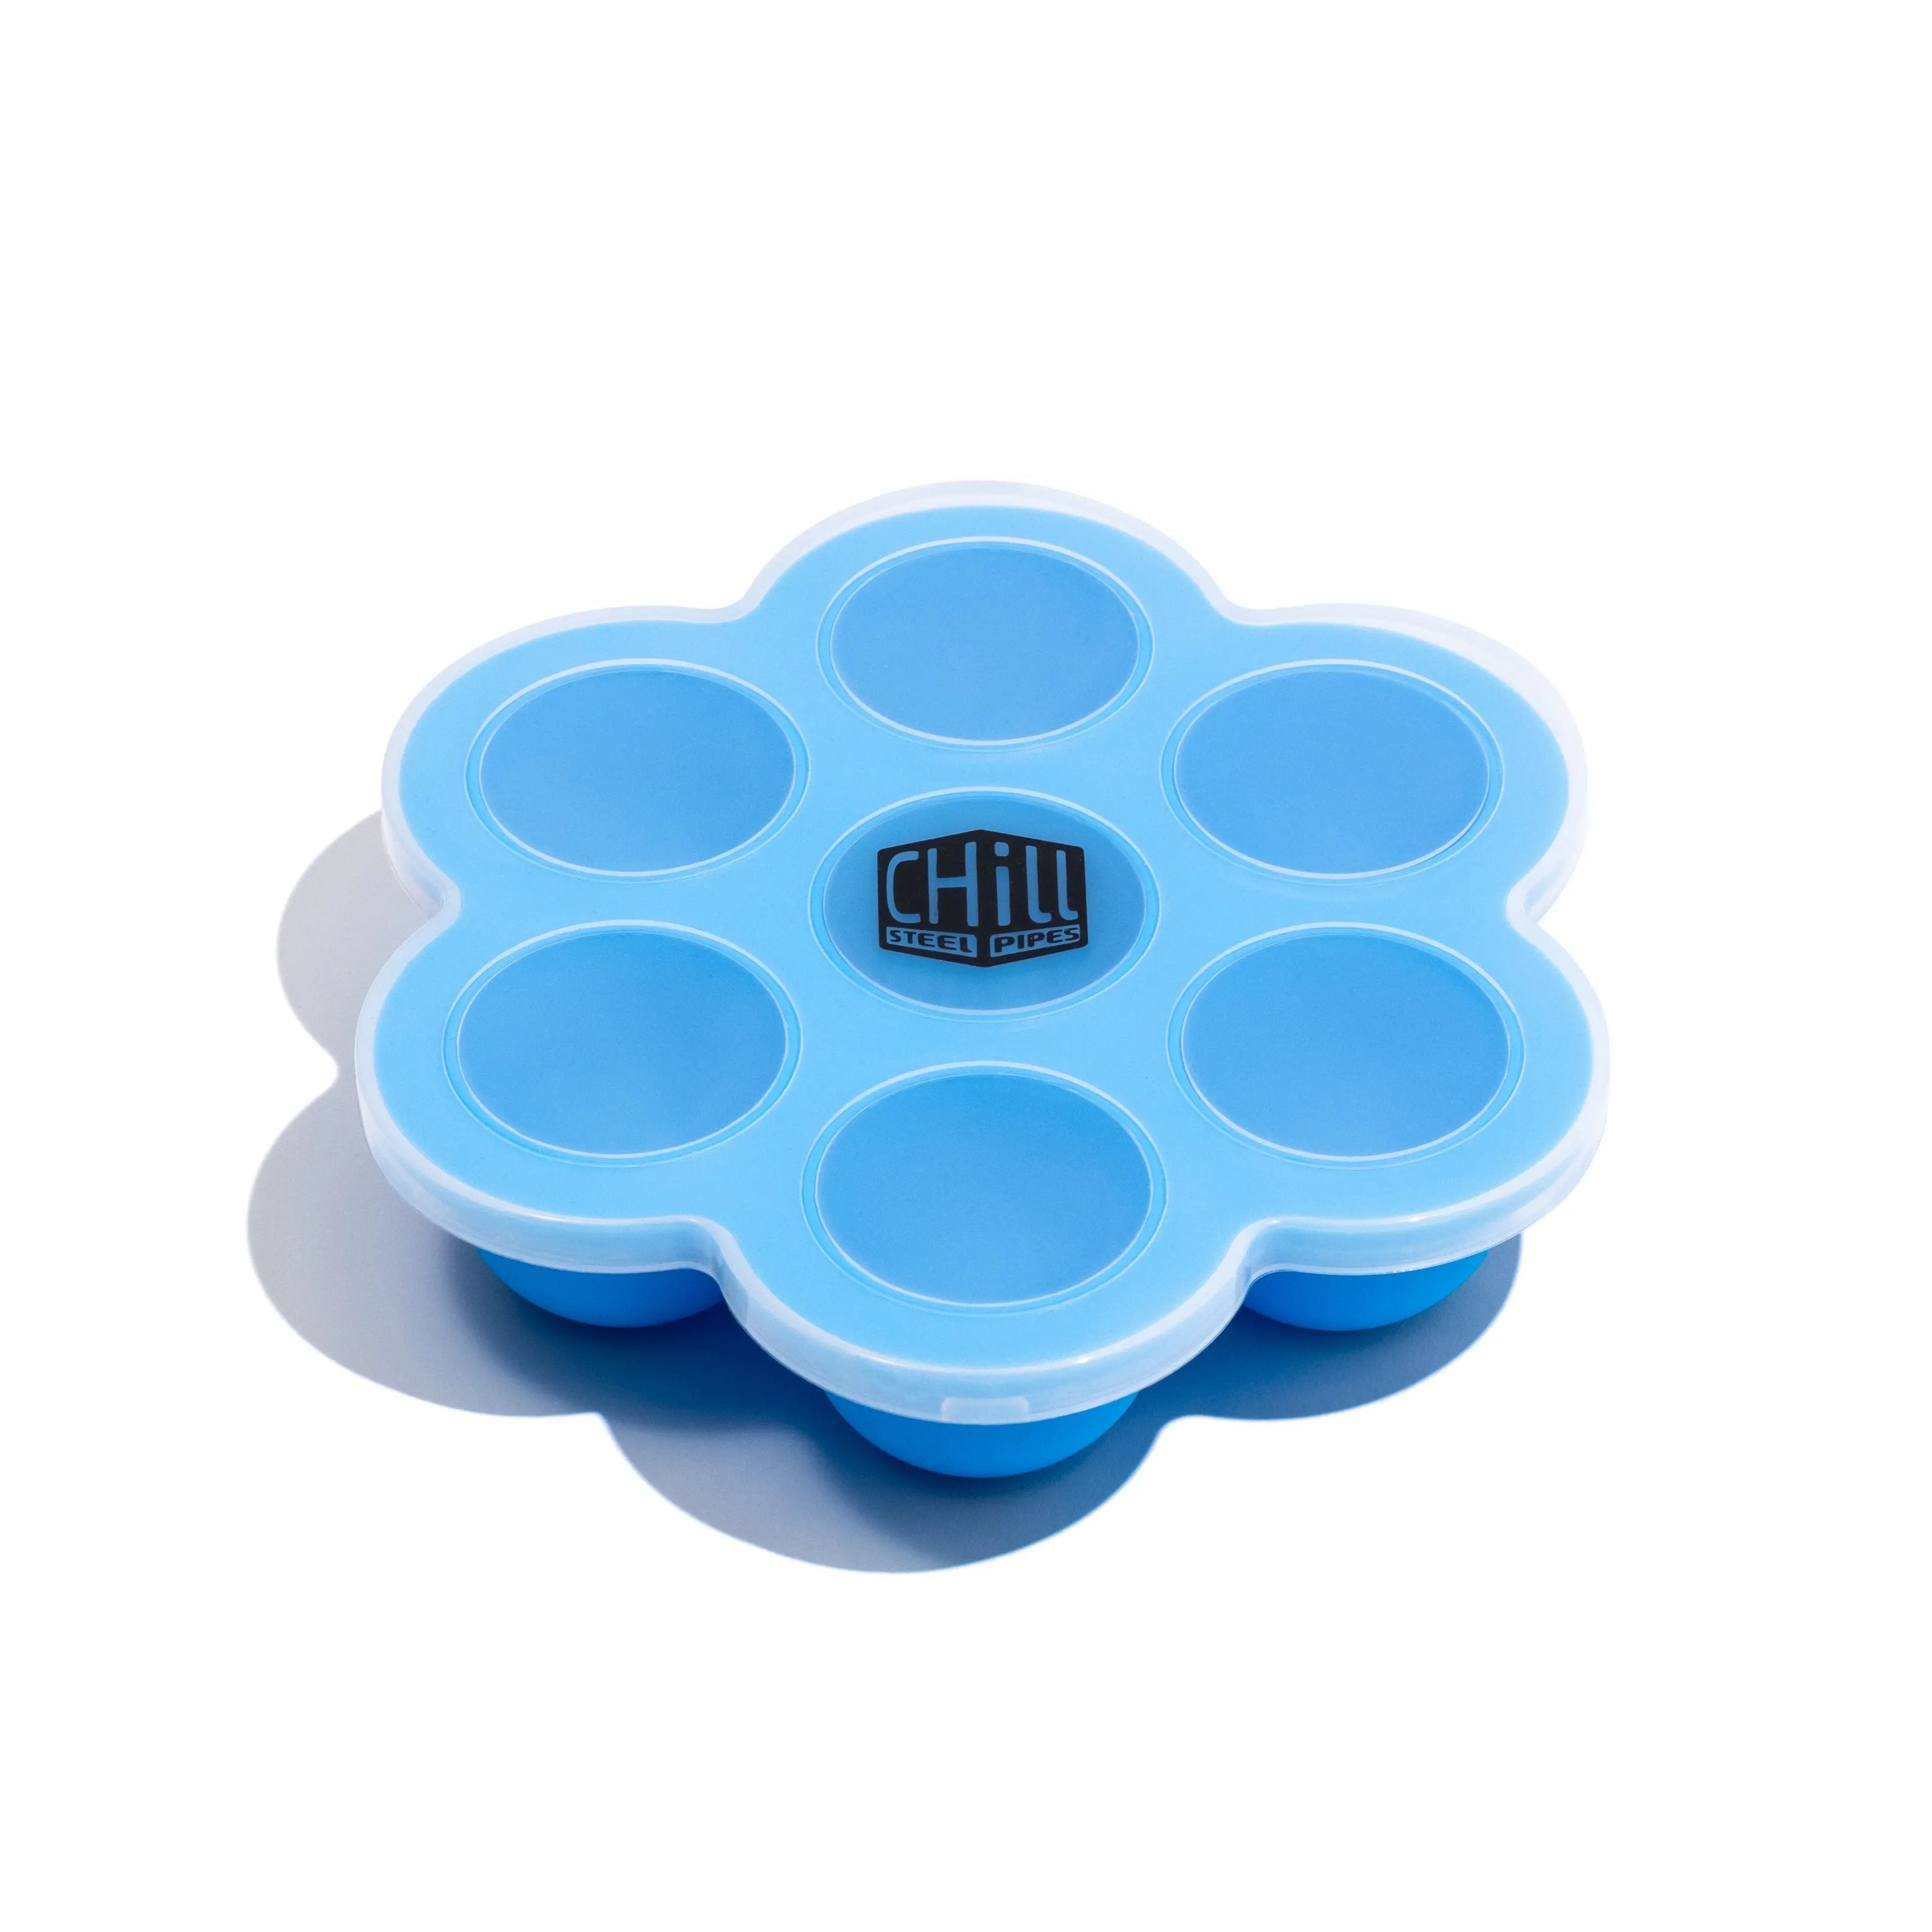 Chill - Extra Large Ice Cube Tray Set by Chill Steel Pipes